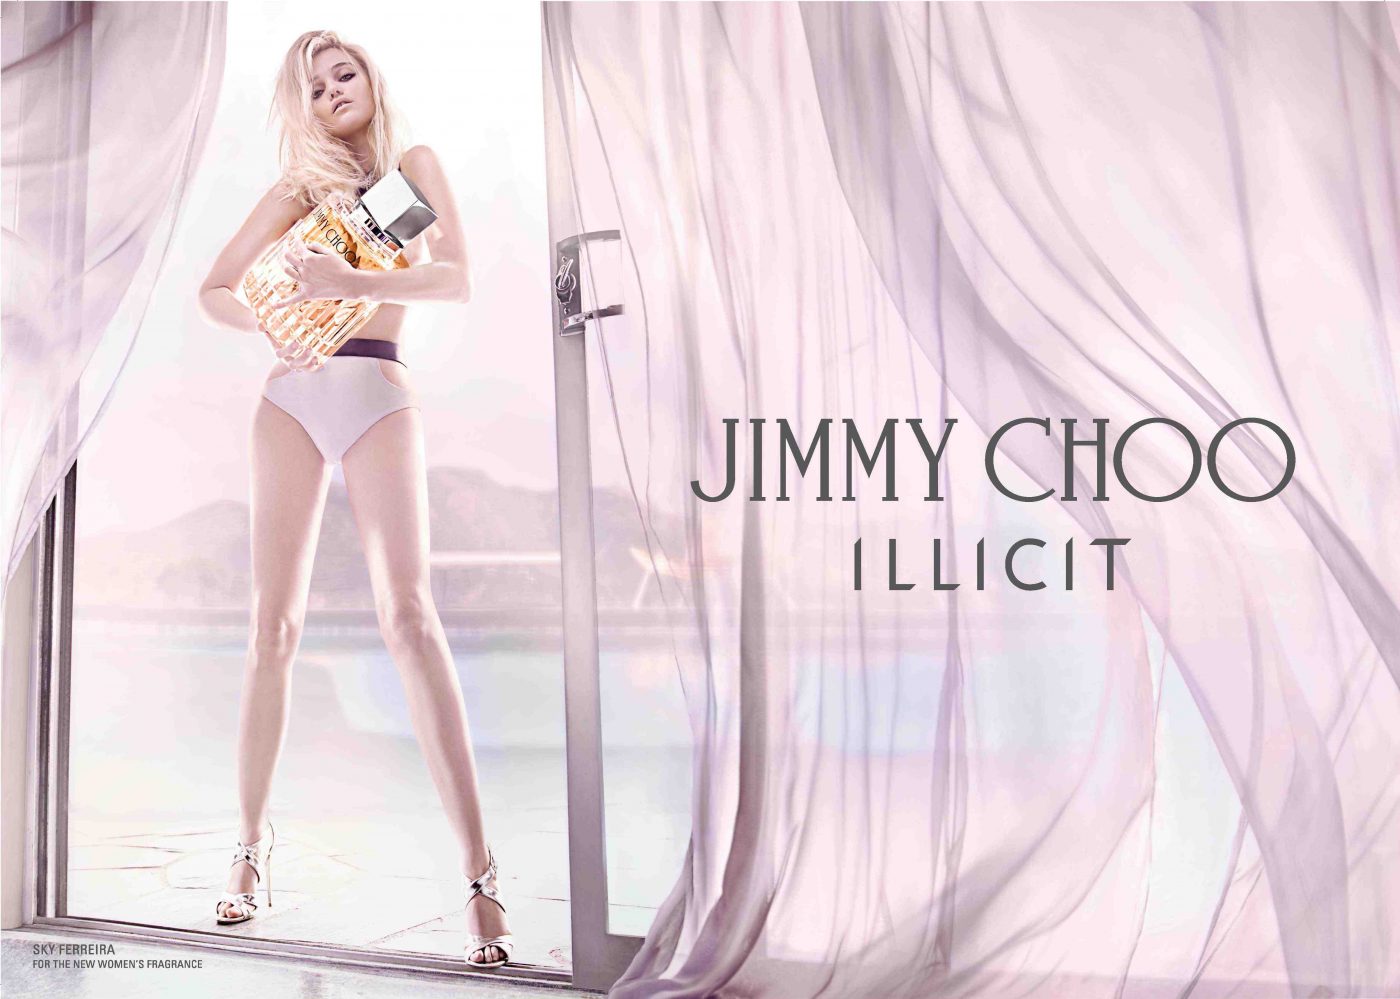 JIMMY CHOO ILLICIT_DOUBLE PAGE